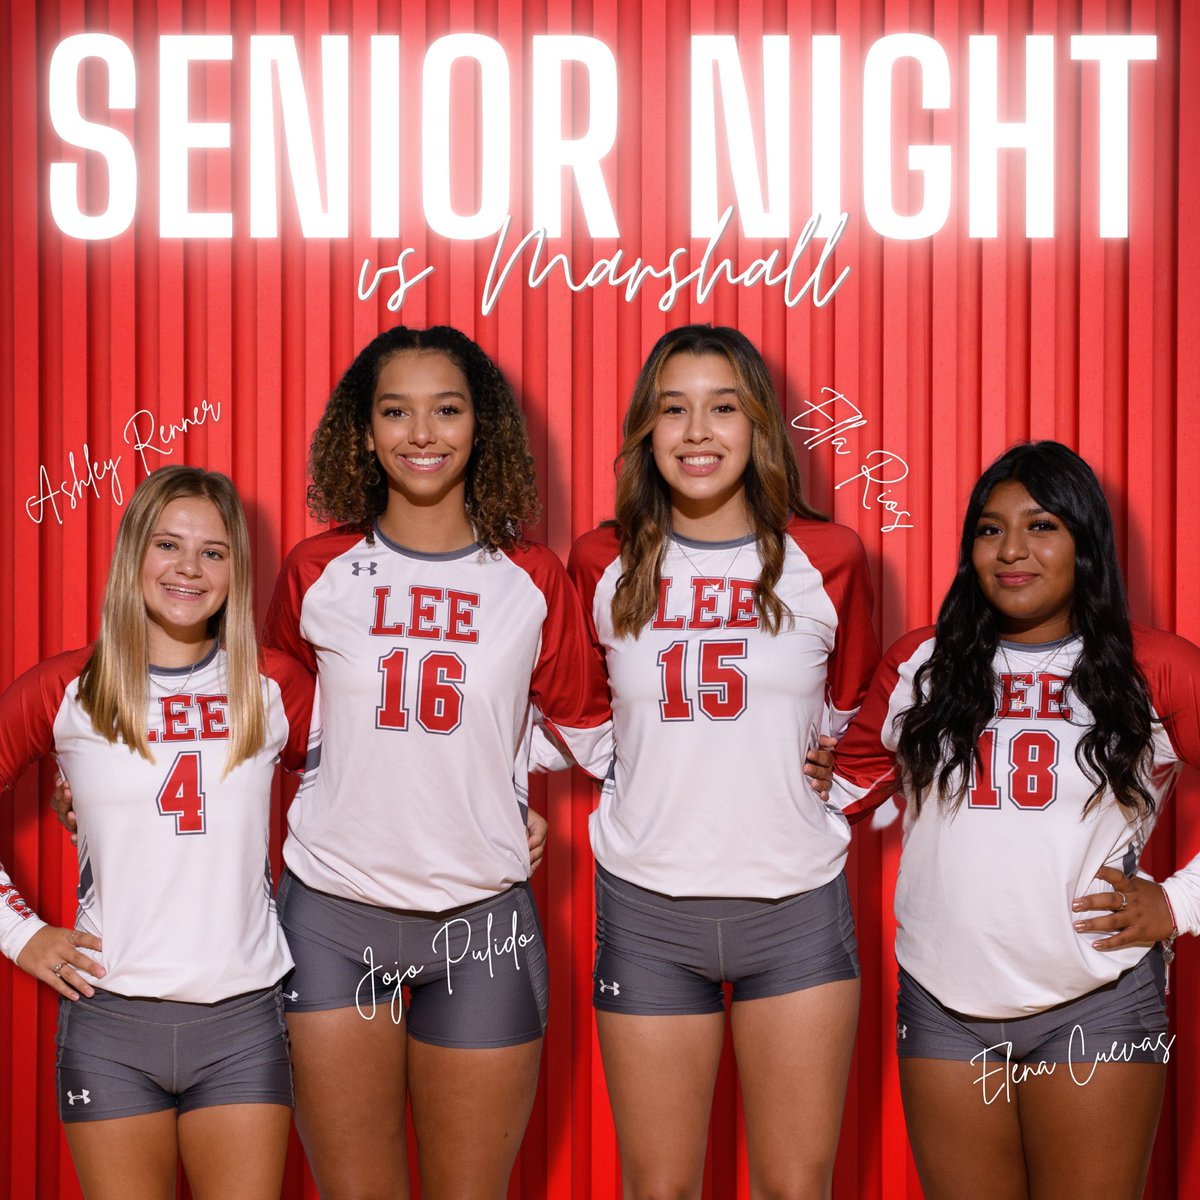 𝔾𝔸𝕄𝔼 𝔻𝔸𝕐 & 𝕊𝔼ℕ𝕀𝕆ℝ ℕ𝕀𝔾ℍ𝕋‼️ 🆚 Marshall Come out to cheer on your favorite teams to a victory! Senior recognition will be before varsity game warmups! ⏰ 9th 5pm // JV 6pm // Varsity 7:15pm 📍LEE 📺 LEE Volleyball YouTube Channel 🎟 Ticket Spicket #govols